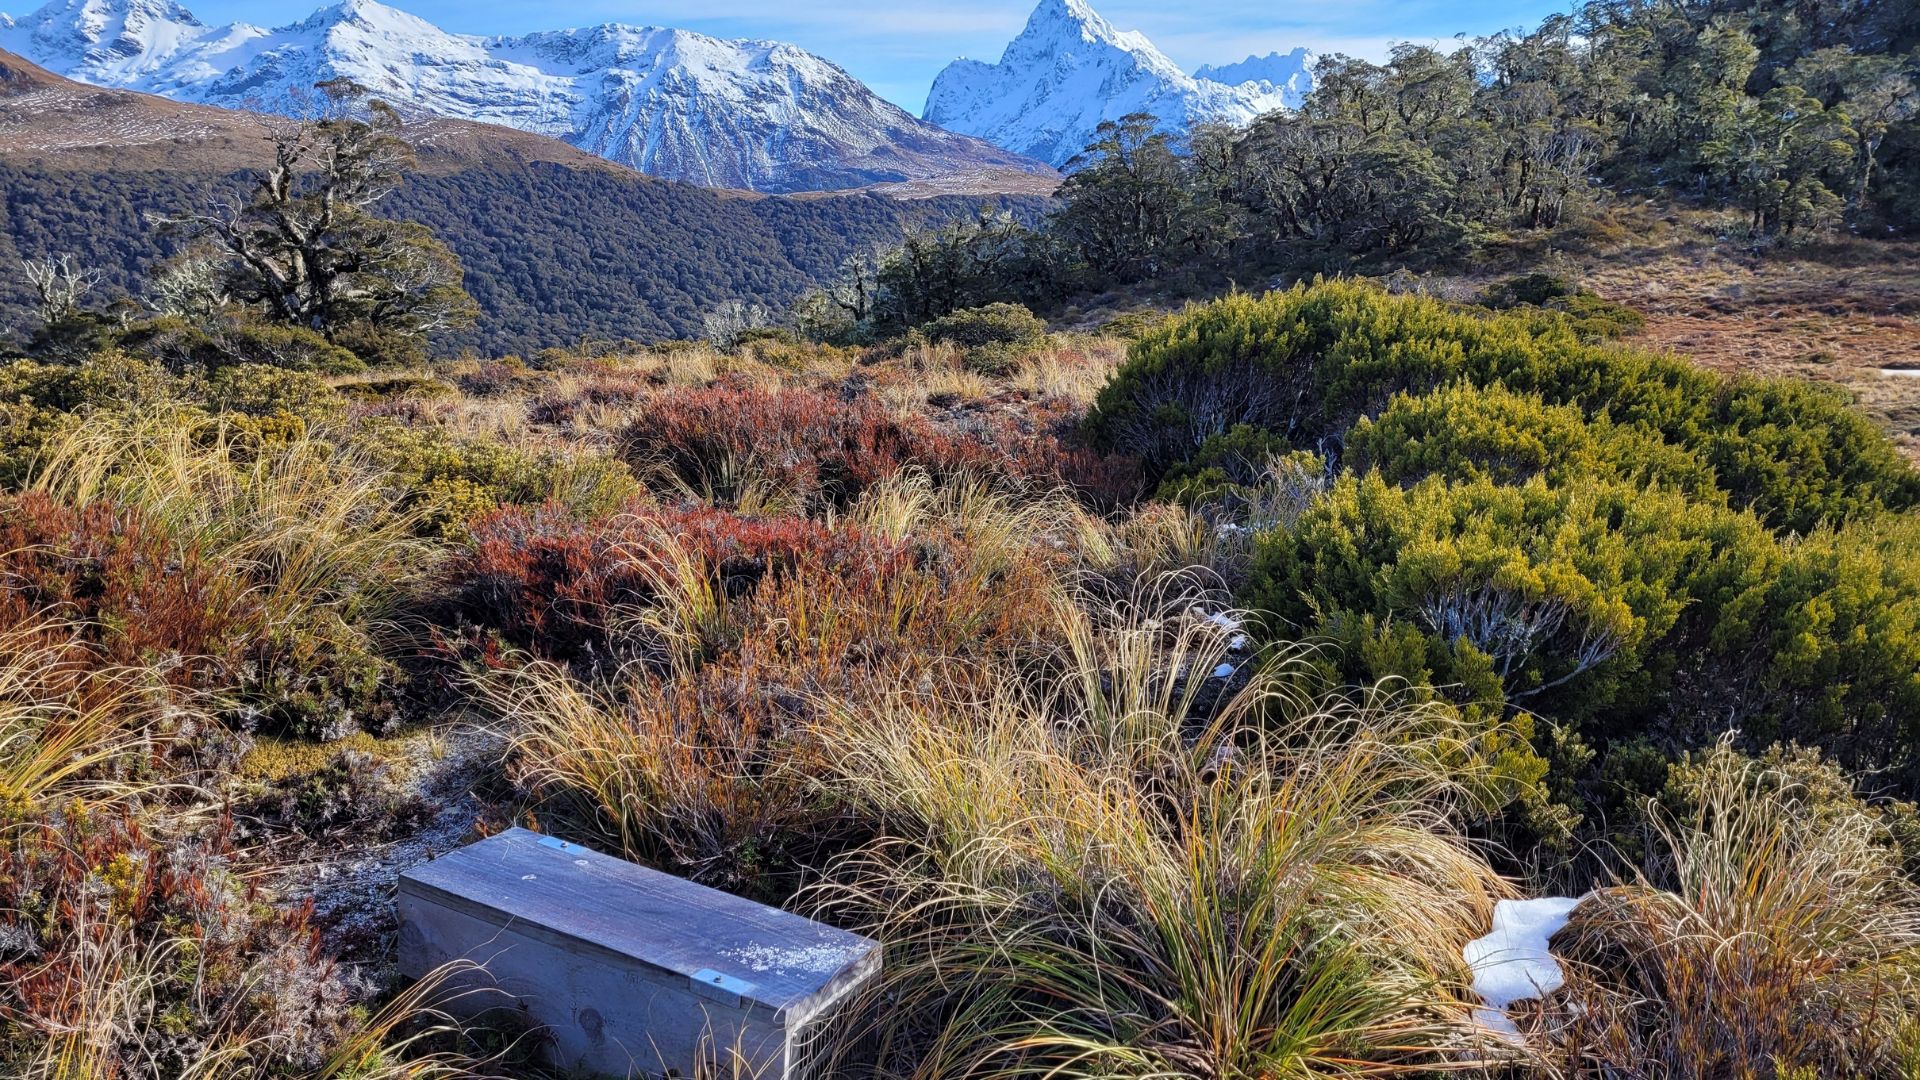 A trap box in the foreground in an alpine valley.